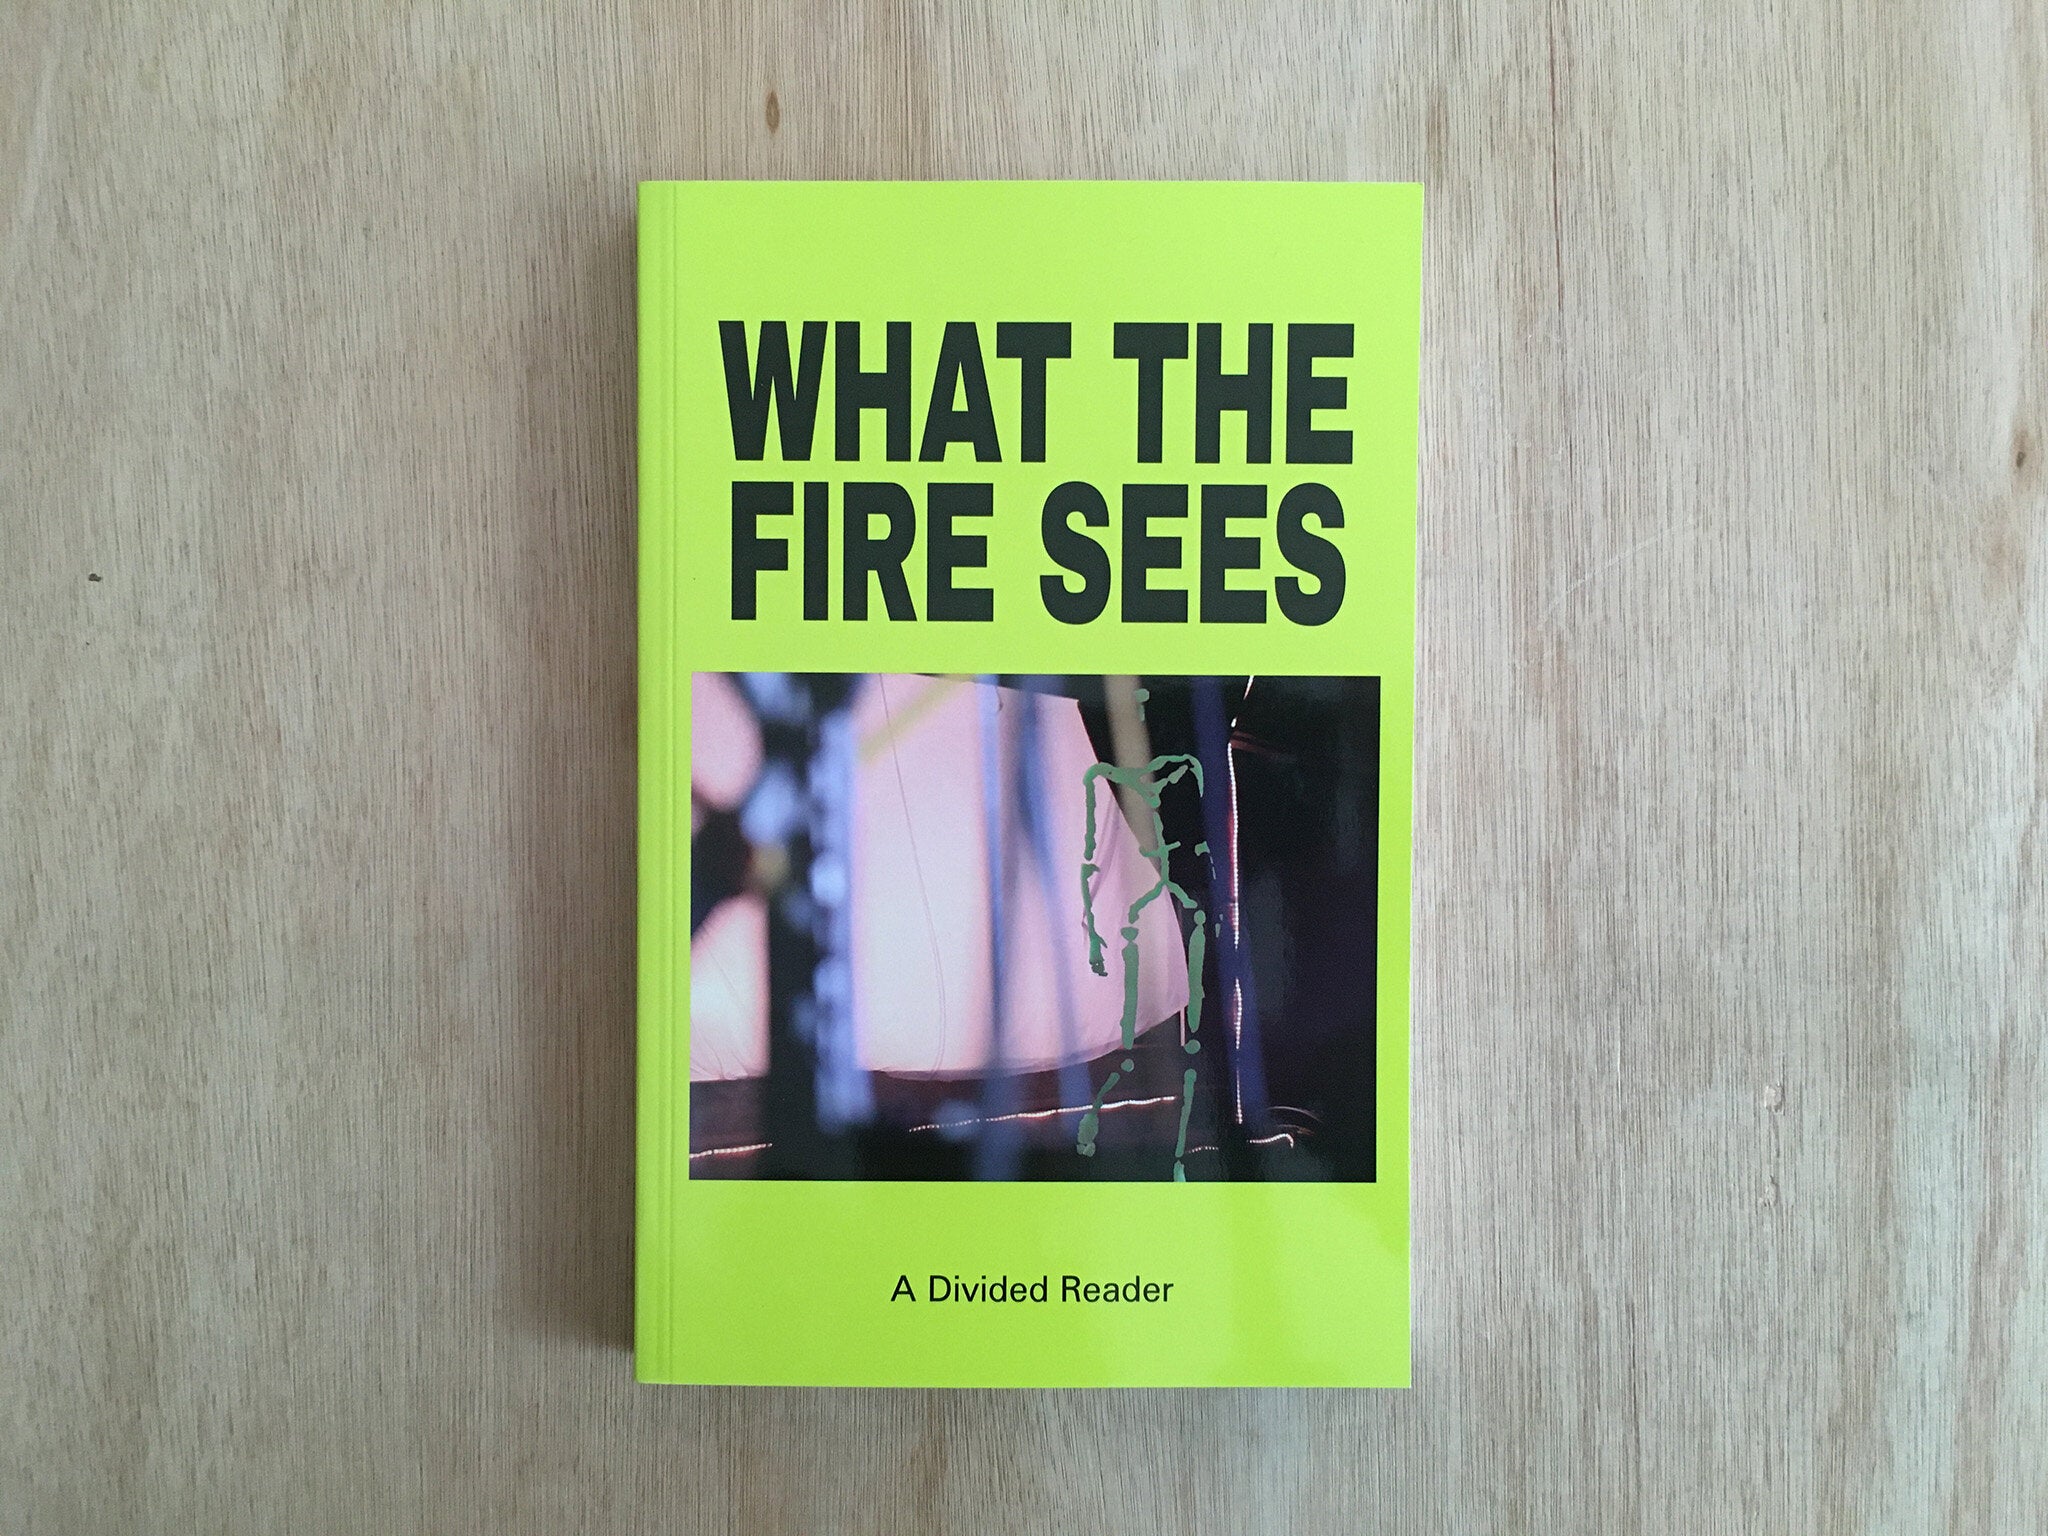 A DIVIDED READER – WHAT THE FIRE SEES by Various Artists